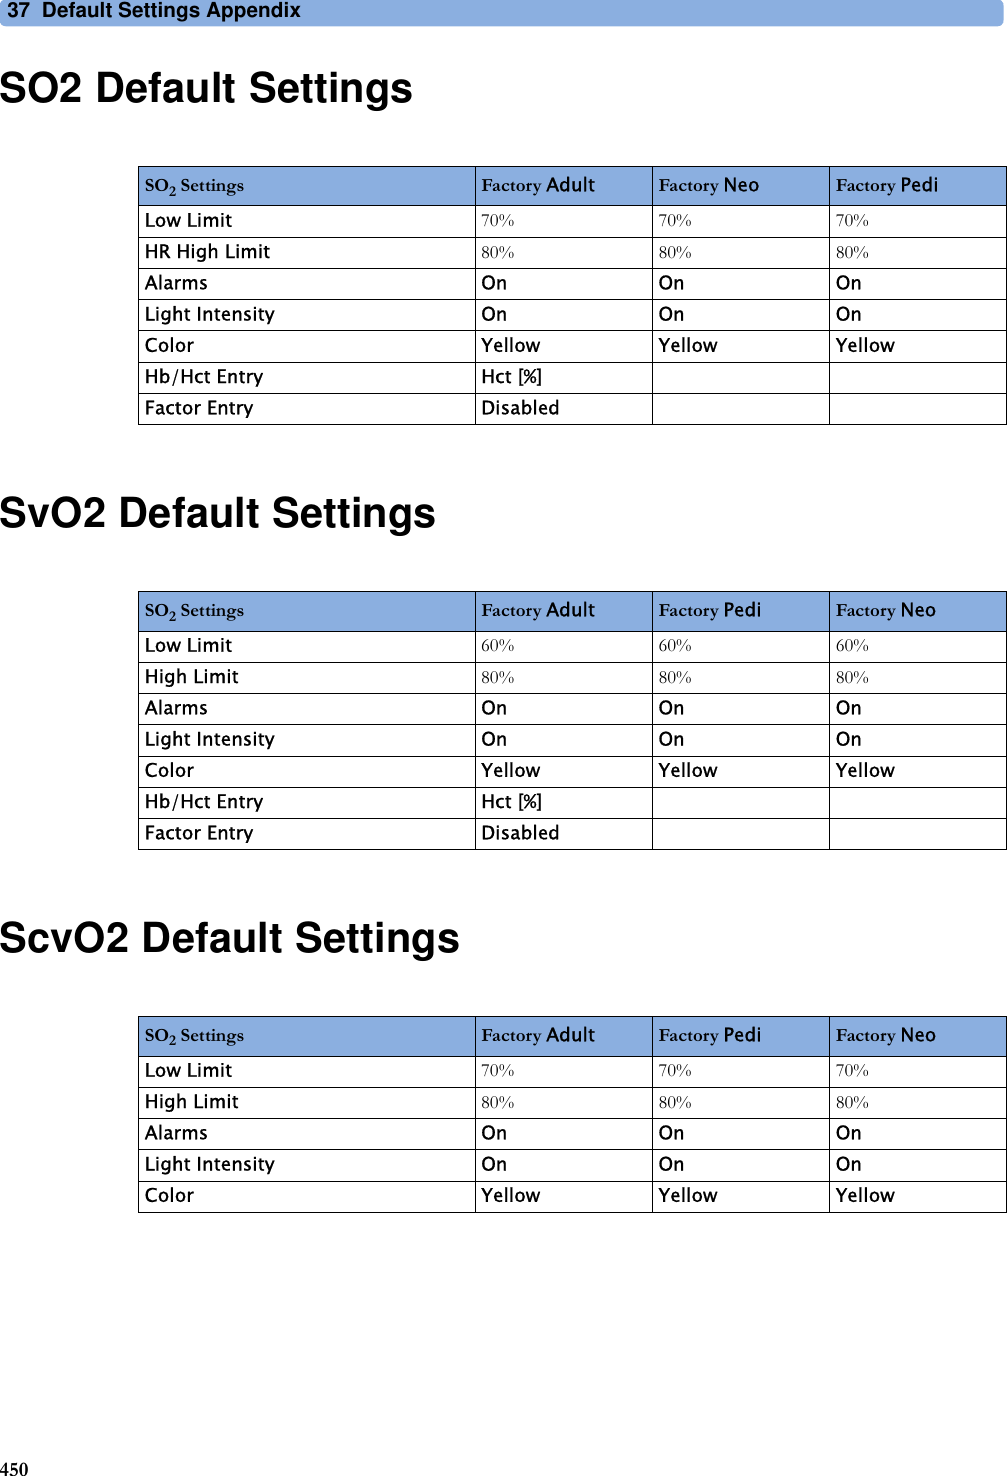 37 Default Settings Appendix450SO2 Default SettingsSvO2 Default SettingsScvO2 Default SettingsSO2 Settings Factory Adult Factory Neo Factory PediLow Limit 70% 70% 70%HR High Limit 80% 80% 80%Alarms On On OnLight Intensity On On OnColor Yellow Yellow YellowHb/Hct Entry Hct [%]Factor Entry DisabledSO2 Settings Factory Adult Factory Pedi Factory NeoLow Limit 60% 60% 60%High Limit 80% 80% 80%Alarms On On OnLight Intensity On On OnColor Yellow Yellow YellowHb/Hct Entry Hct [%]Factor Entry DisabledSO2 Settings Factory Adult Factory Pedi Factory NeoLow Limit 70% 70% 70%High Limit 80% 80% 80%Alarms On On OnLight Intensity On On OnColor Yellow Yellow Yellow